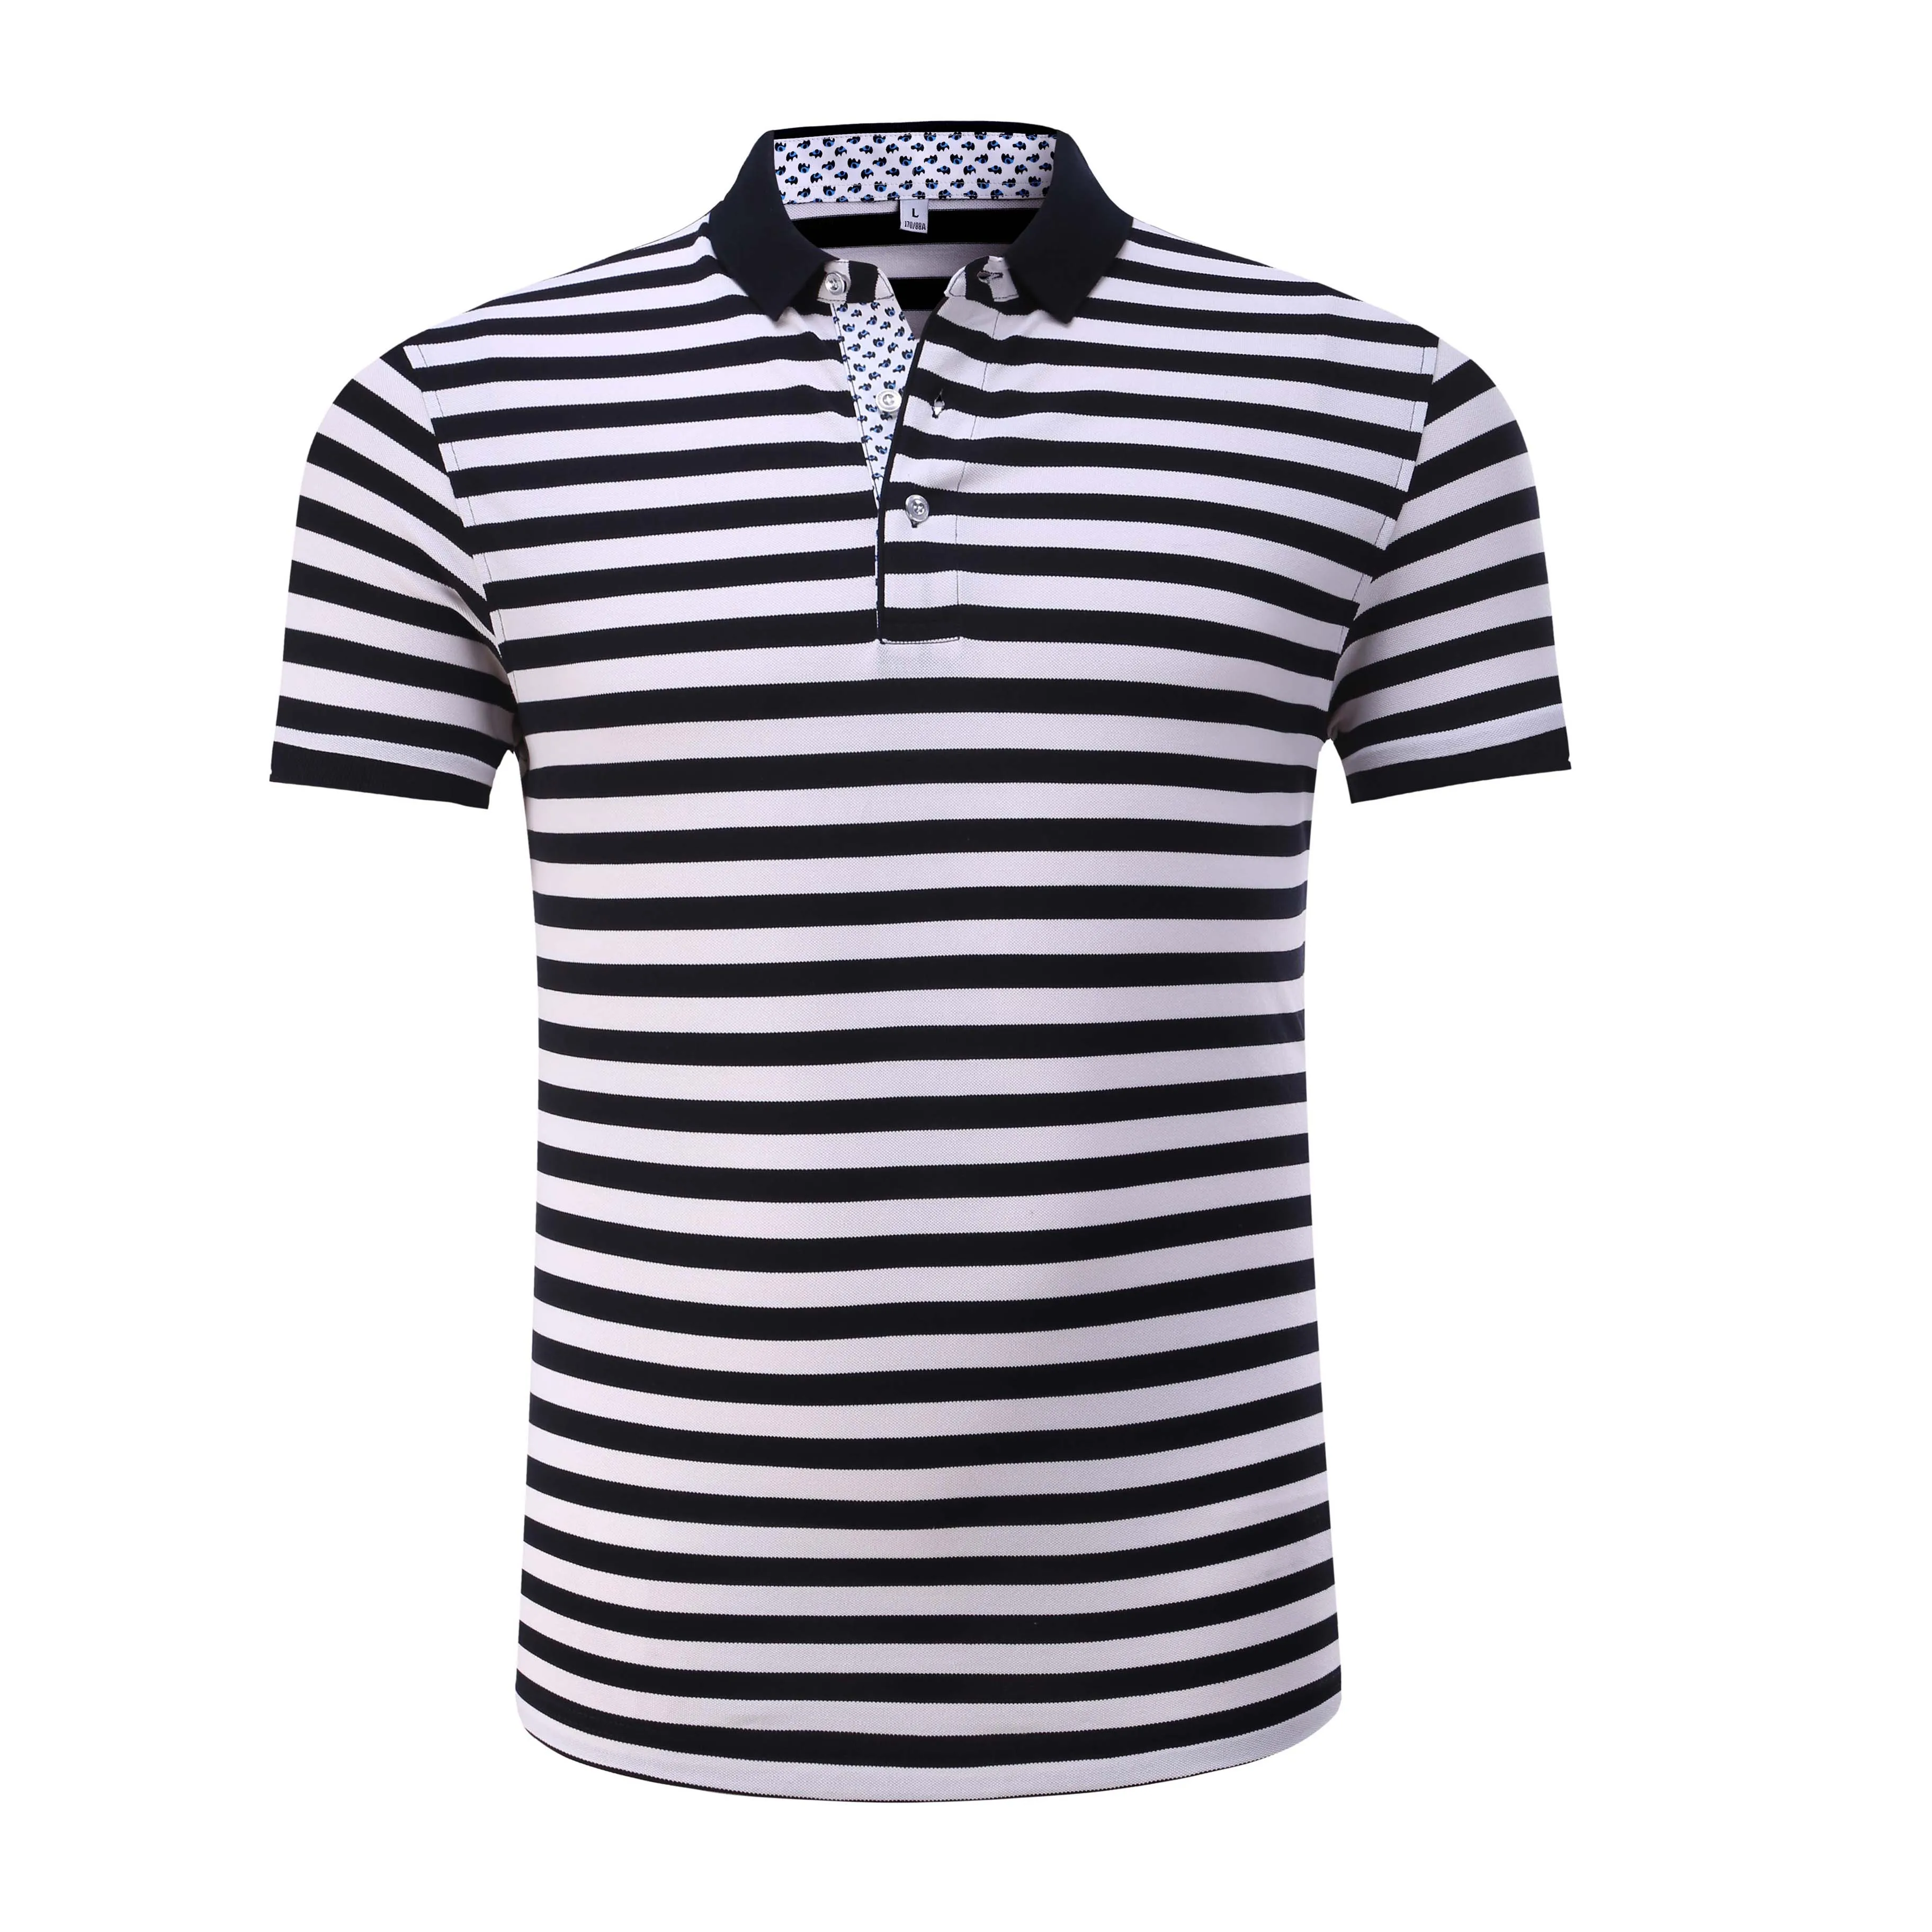 Two Color Striped Polo Shirt For Men And Women Formal Short Sleeve Polo T  Shirts - Buy Striped Polo Shirt For Men,Formal Polo T Shirt,T Shirts Polo  Product on Alibaba.com